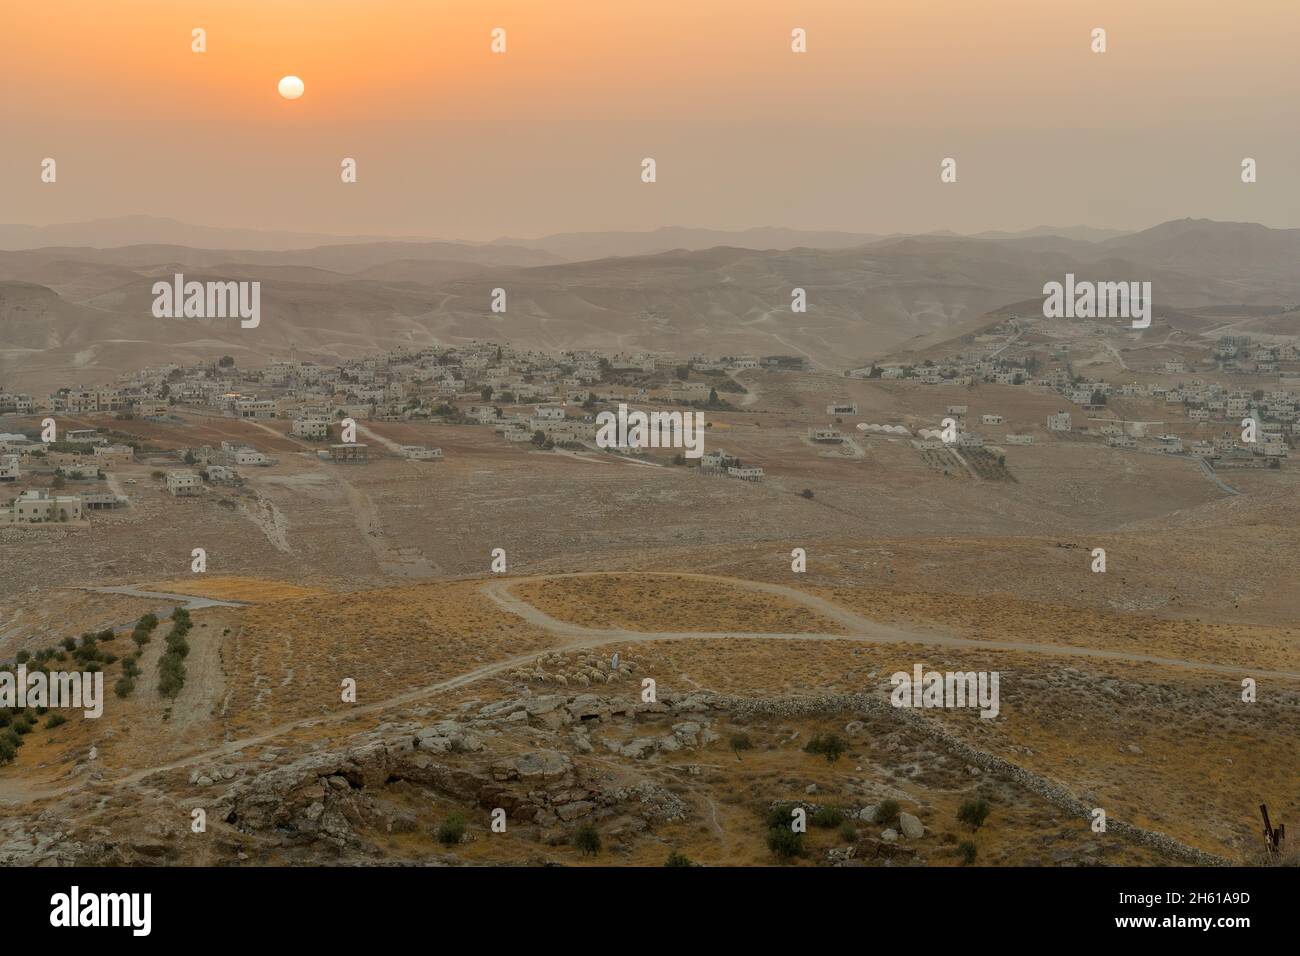 Sunrise view towards the Judaean desert and the Dead Sea, with a herd of sheep and Palestinian villages. From Herodium, the West Bank, South of Jerusa Stock Photo